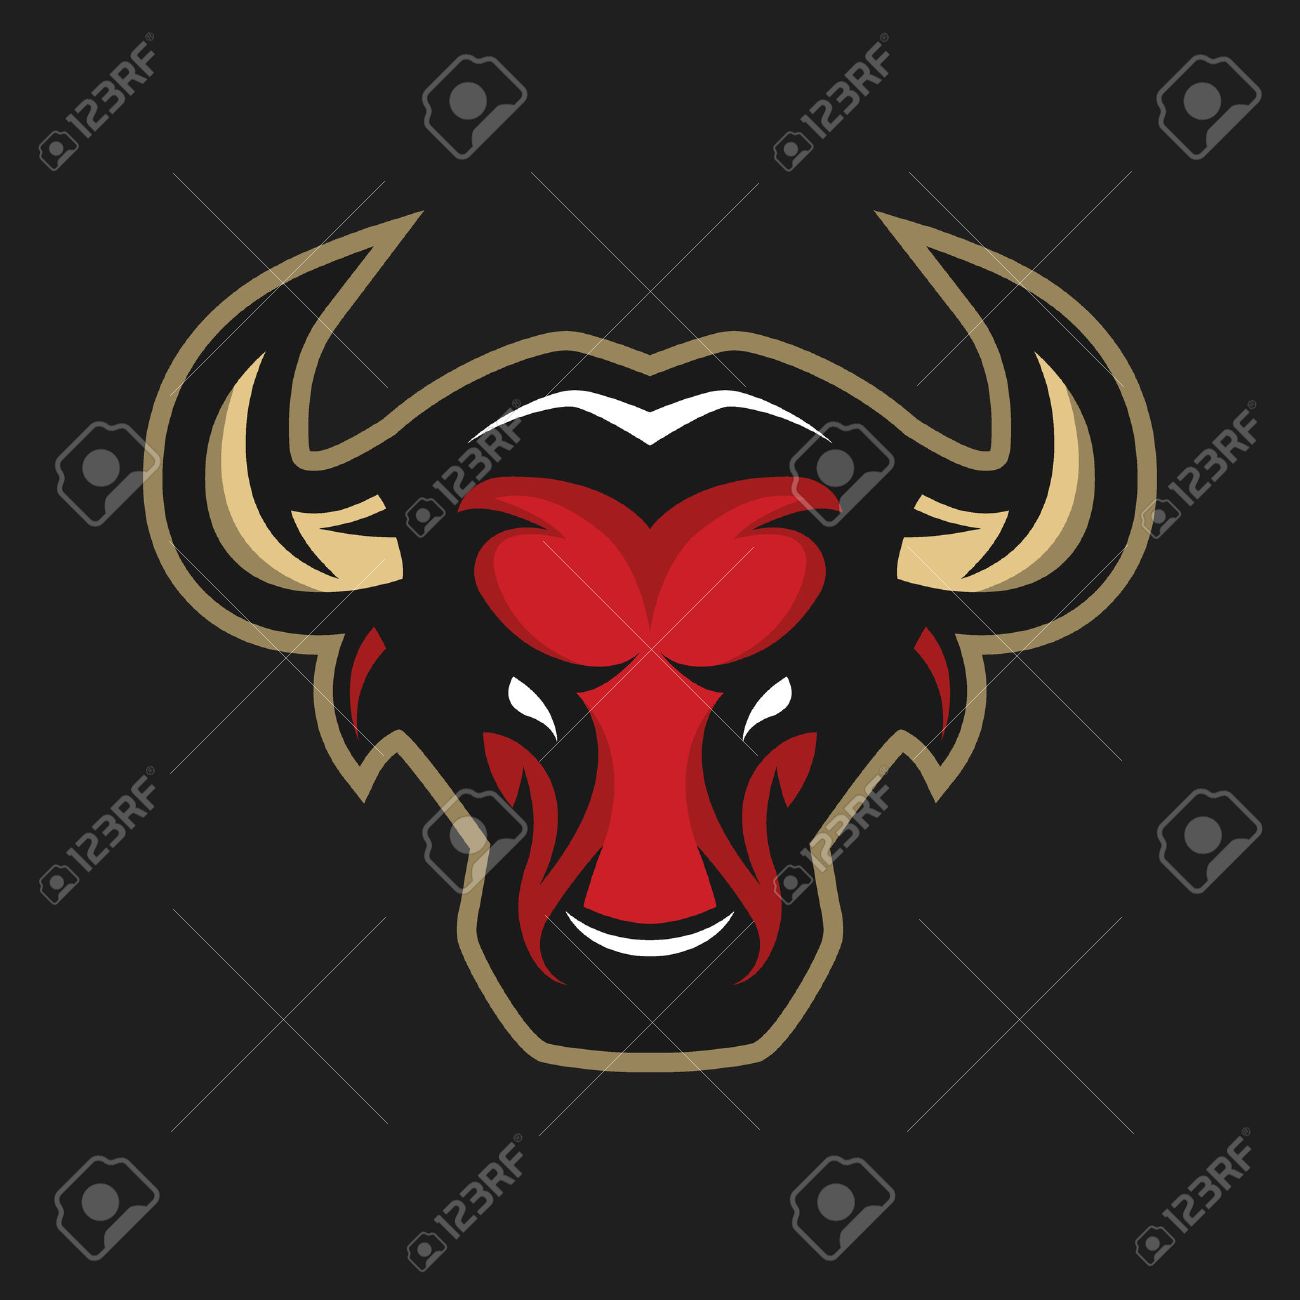 Angry Bull Logo Symbol On A Dark Background Royalty Cliparts